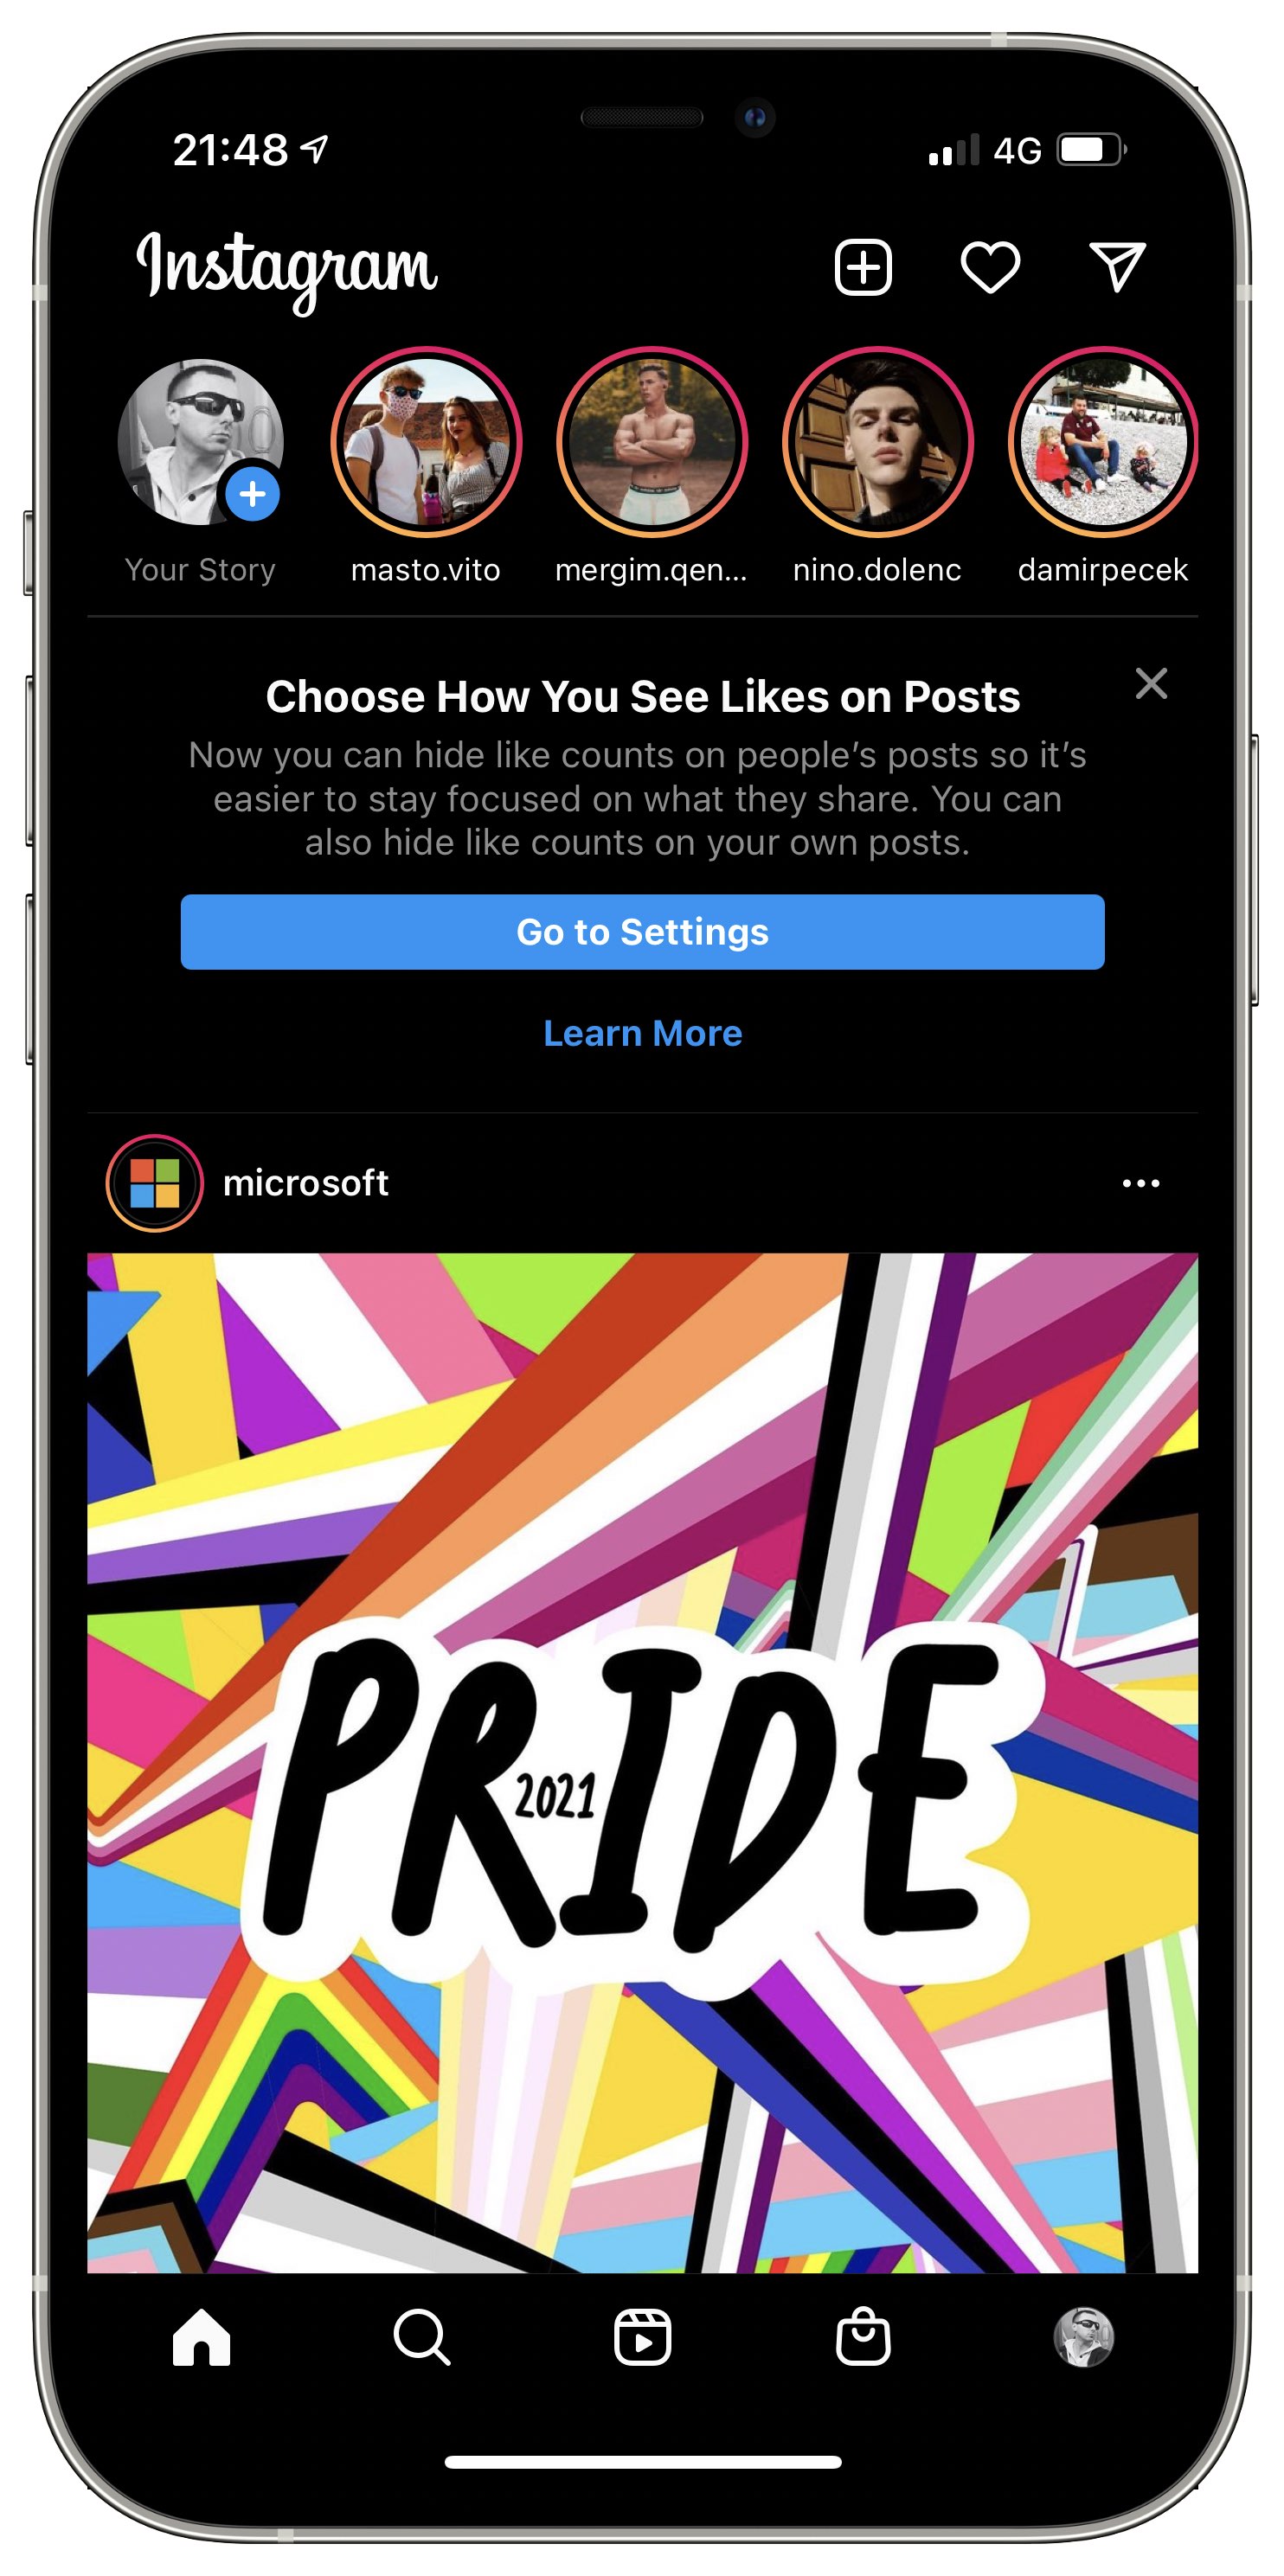 An iPhone screenshot showing a message on Instagram about the ability to hide like counts on posts